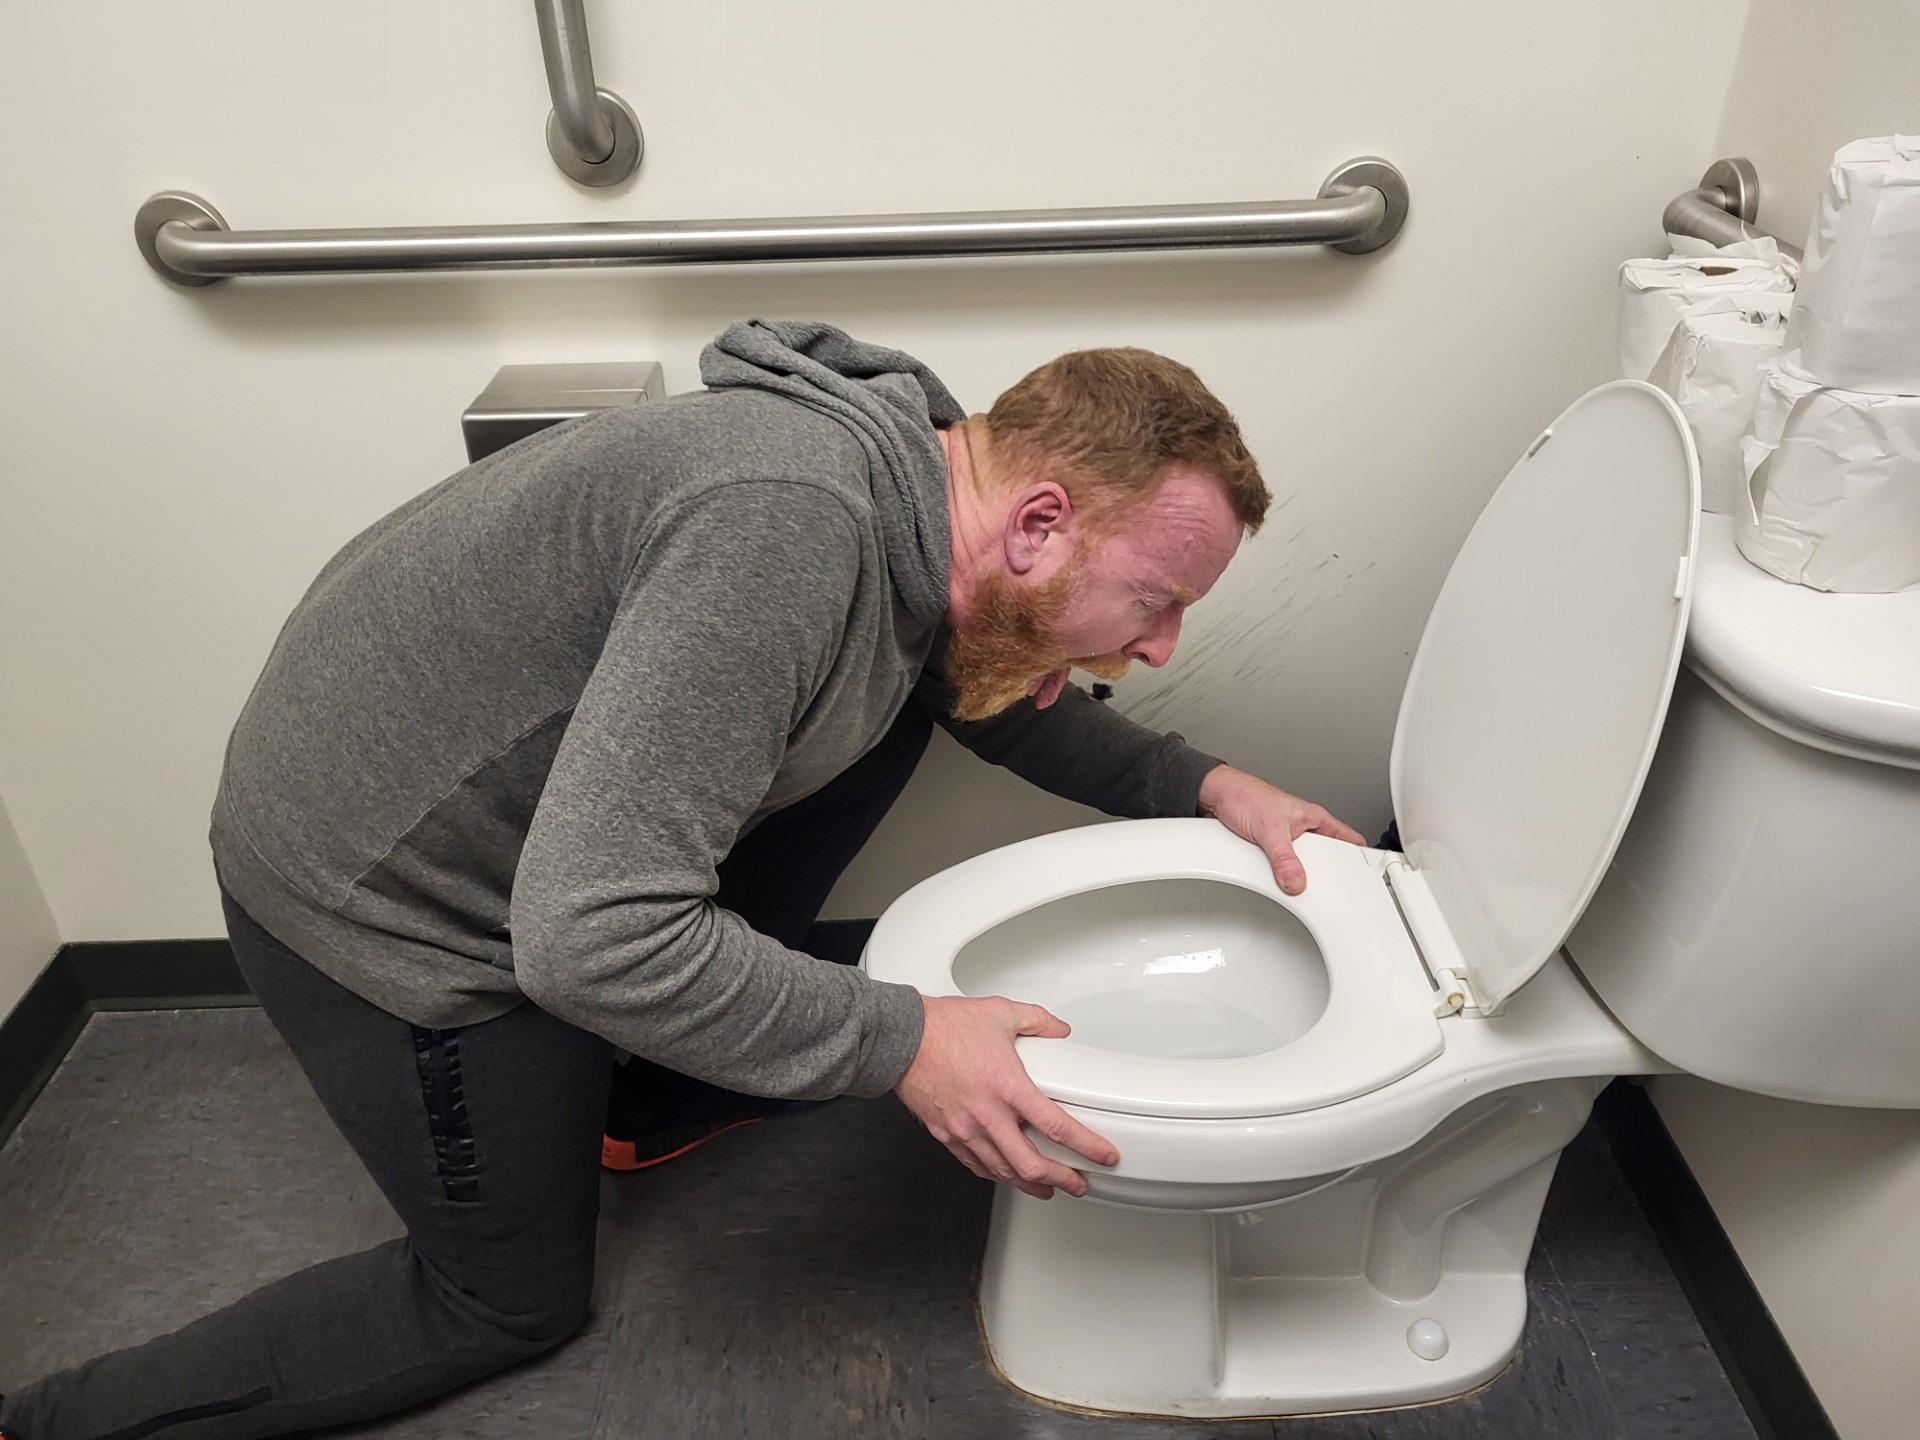 East Side Dave Checks In With The Toilet On St Patrick's Parade.